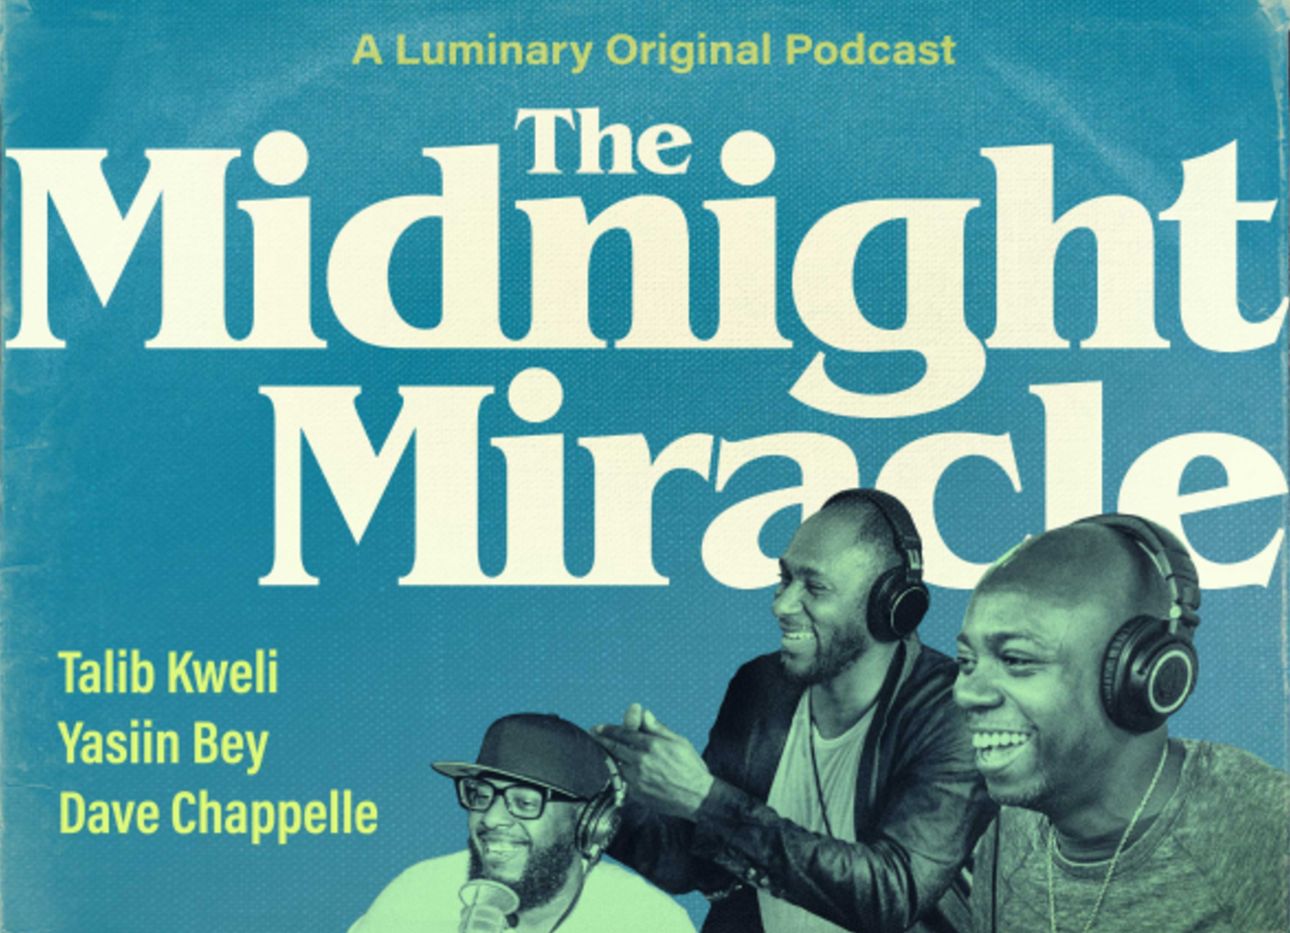 Poster for The Midnight Miracle podcast